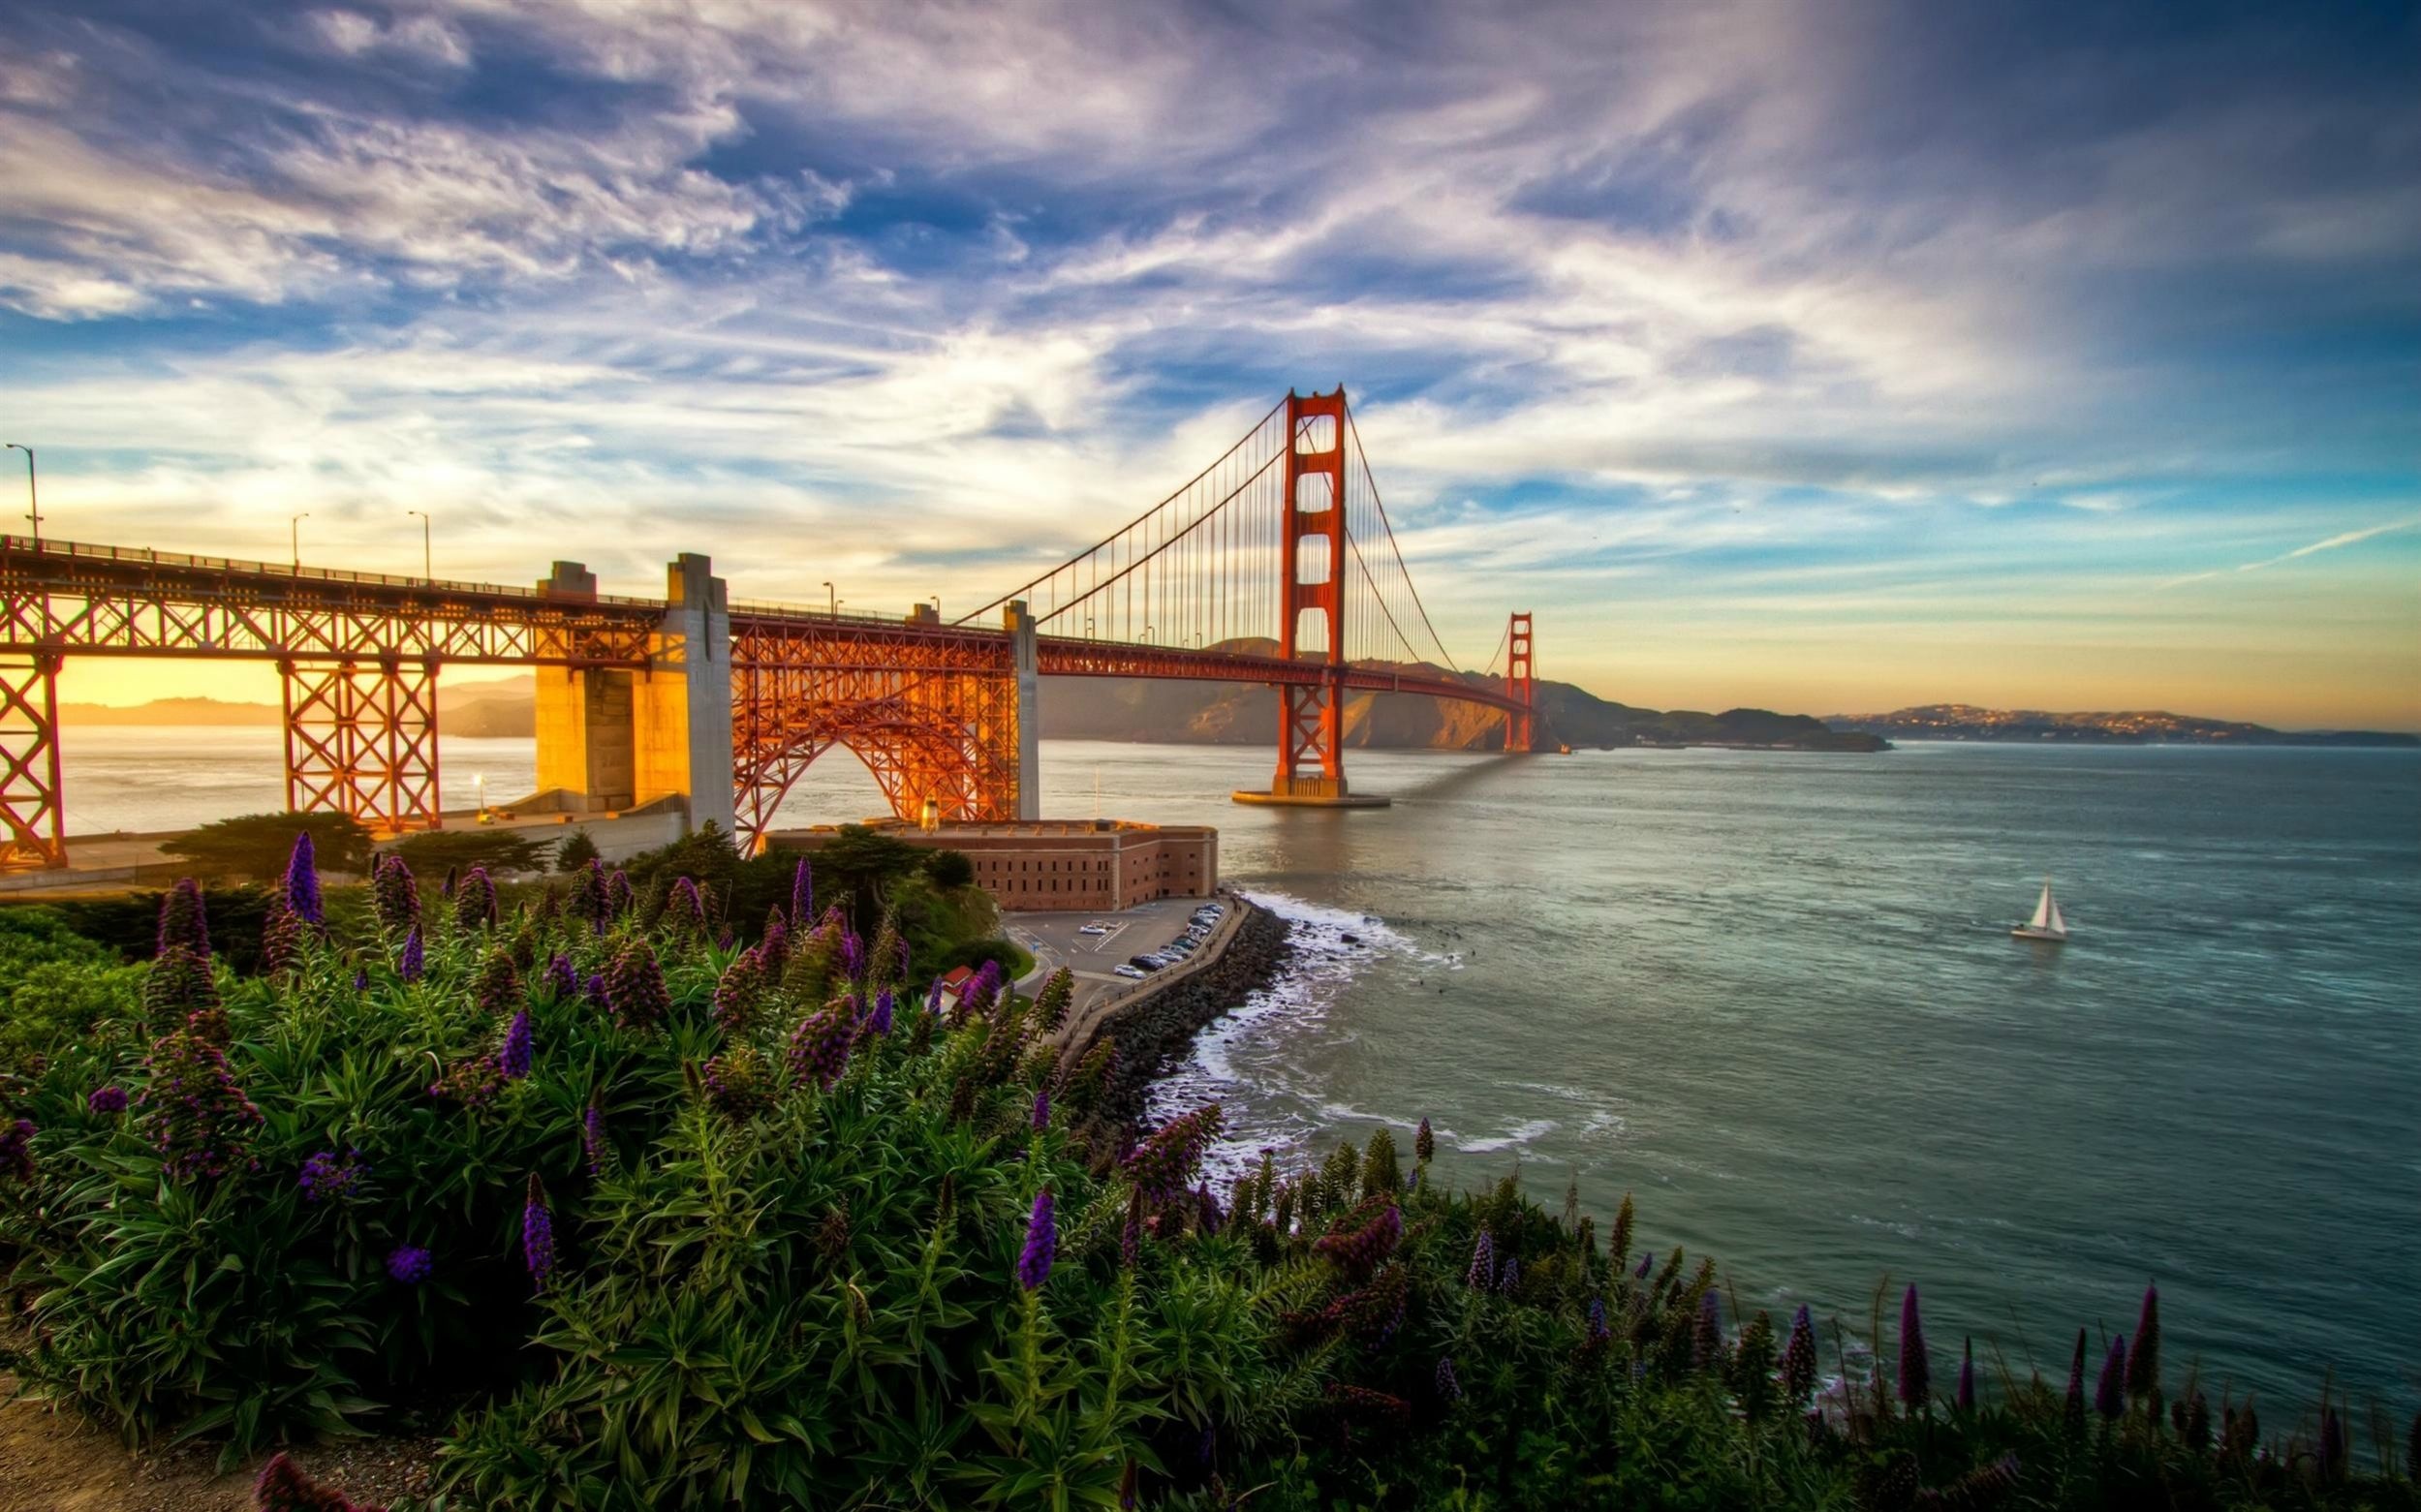 San Francisco: The 13th largest city in the United States, Coastline. 2500x1570 HD Wallpaper.